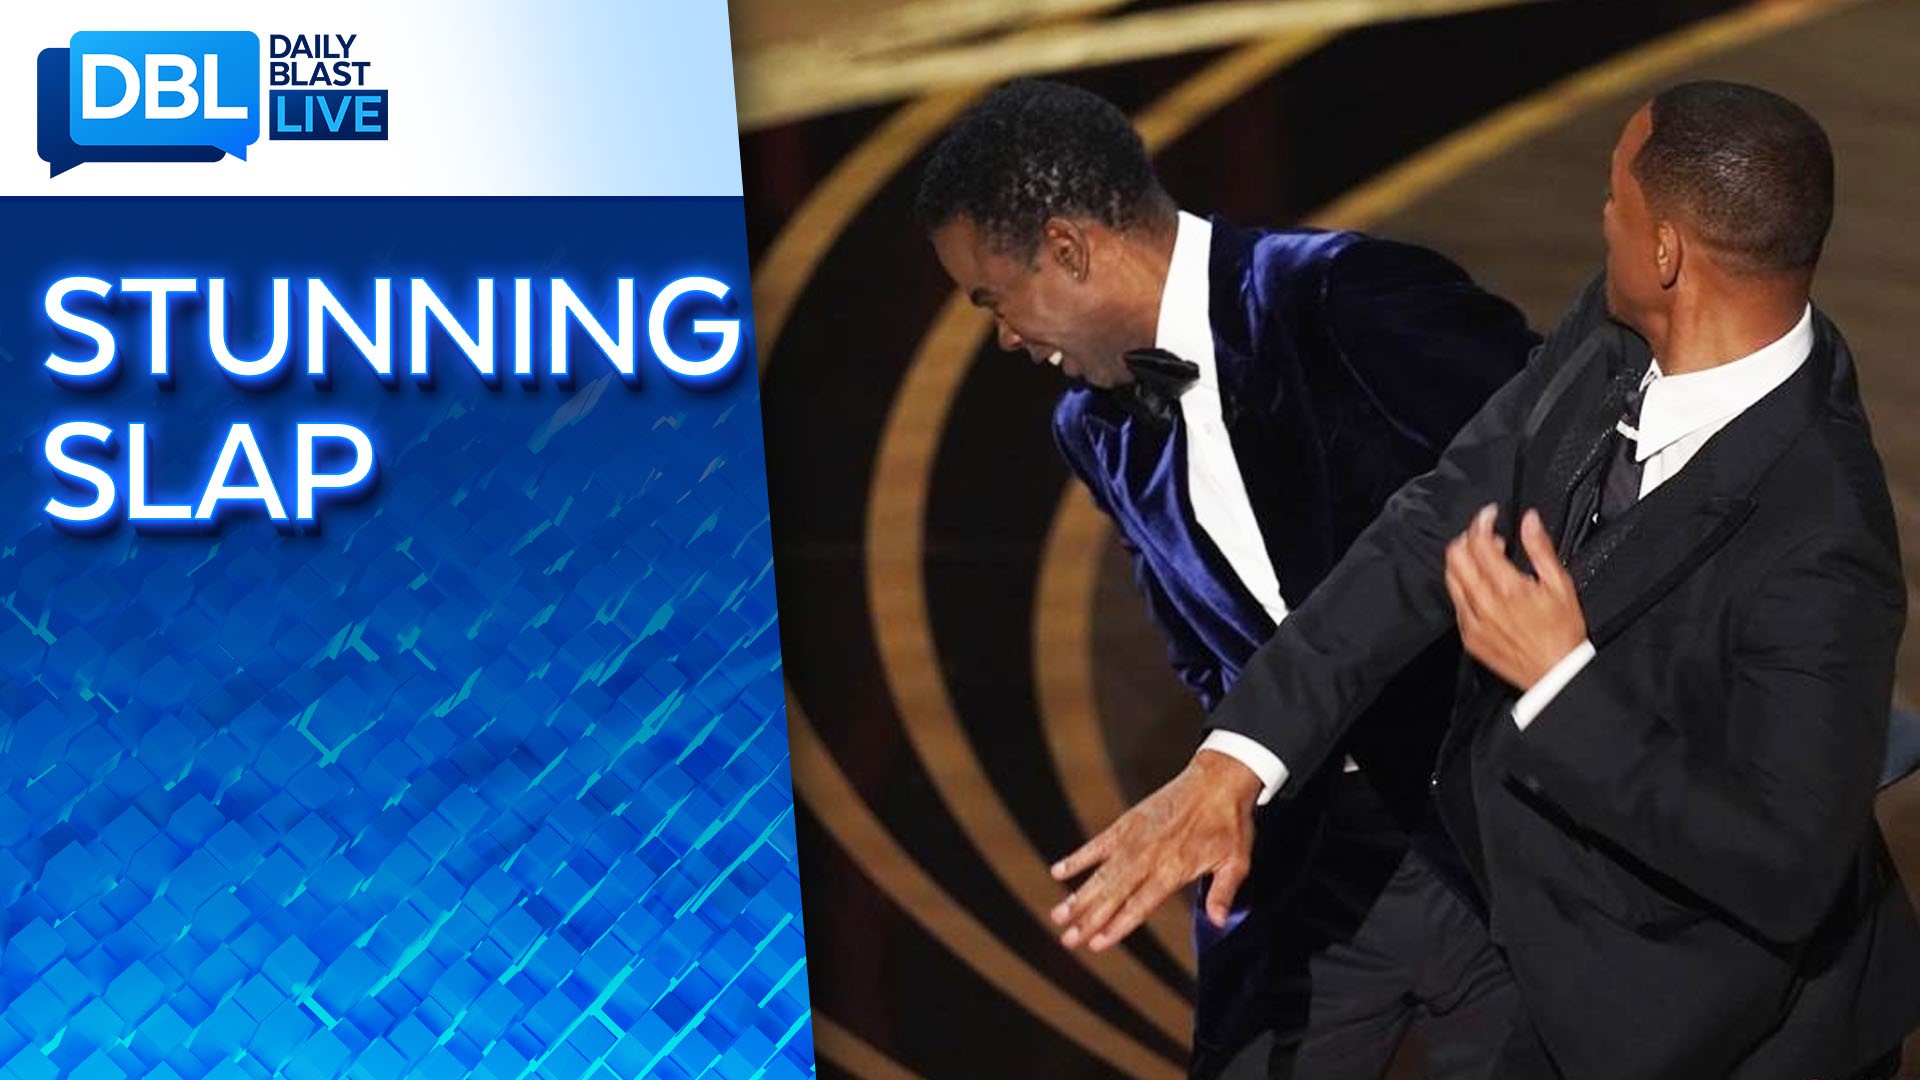 It's been dubbed the slap heard around the world.
The panel discusses the impact and fallout of Will Smith's on-stage assault of Chris Rock at the Academy Awards.